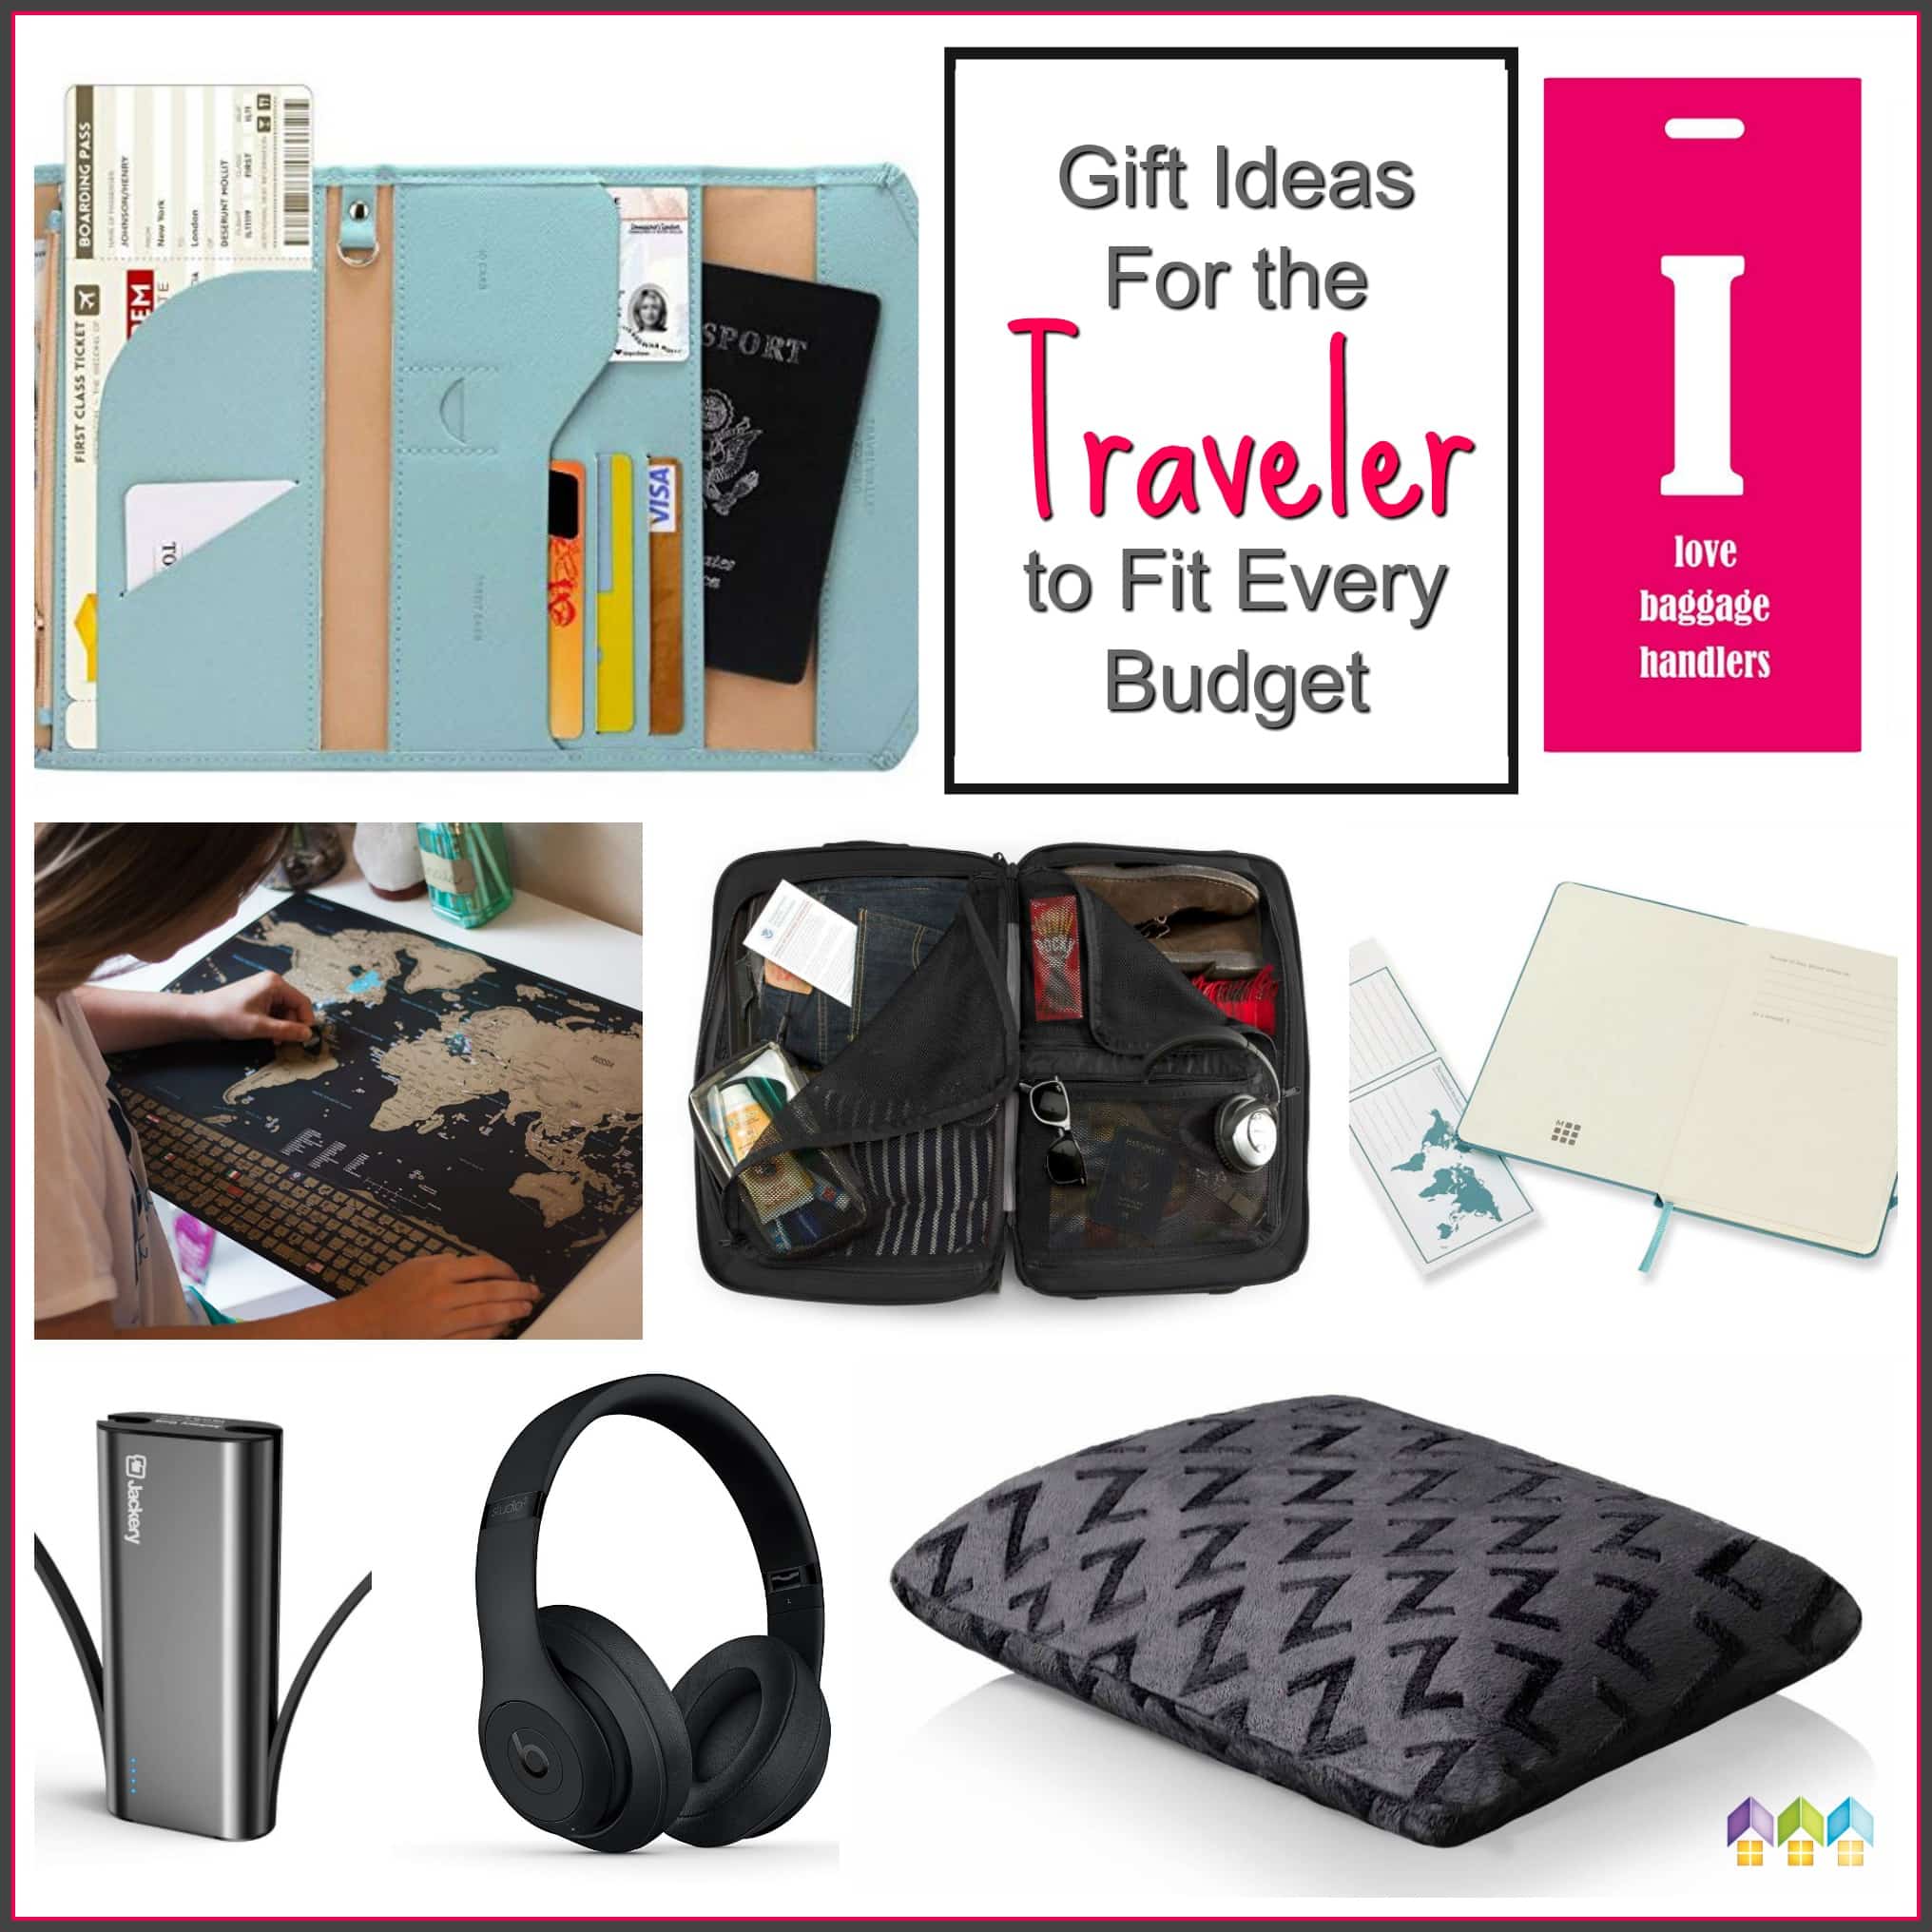 Gift Ideas for the Traveler to Fit Every Budget